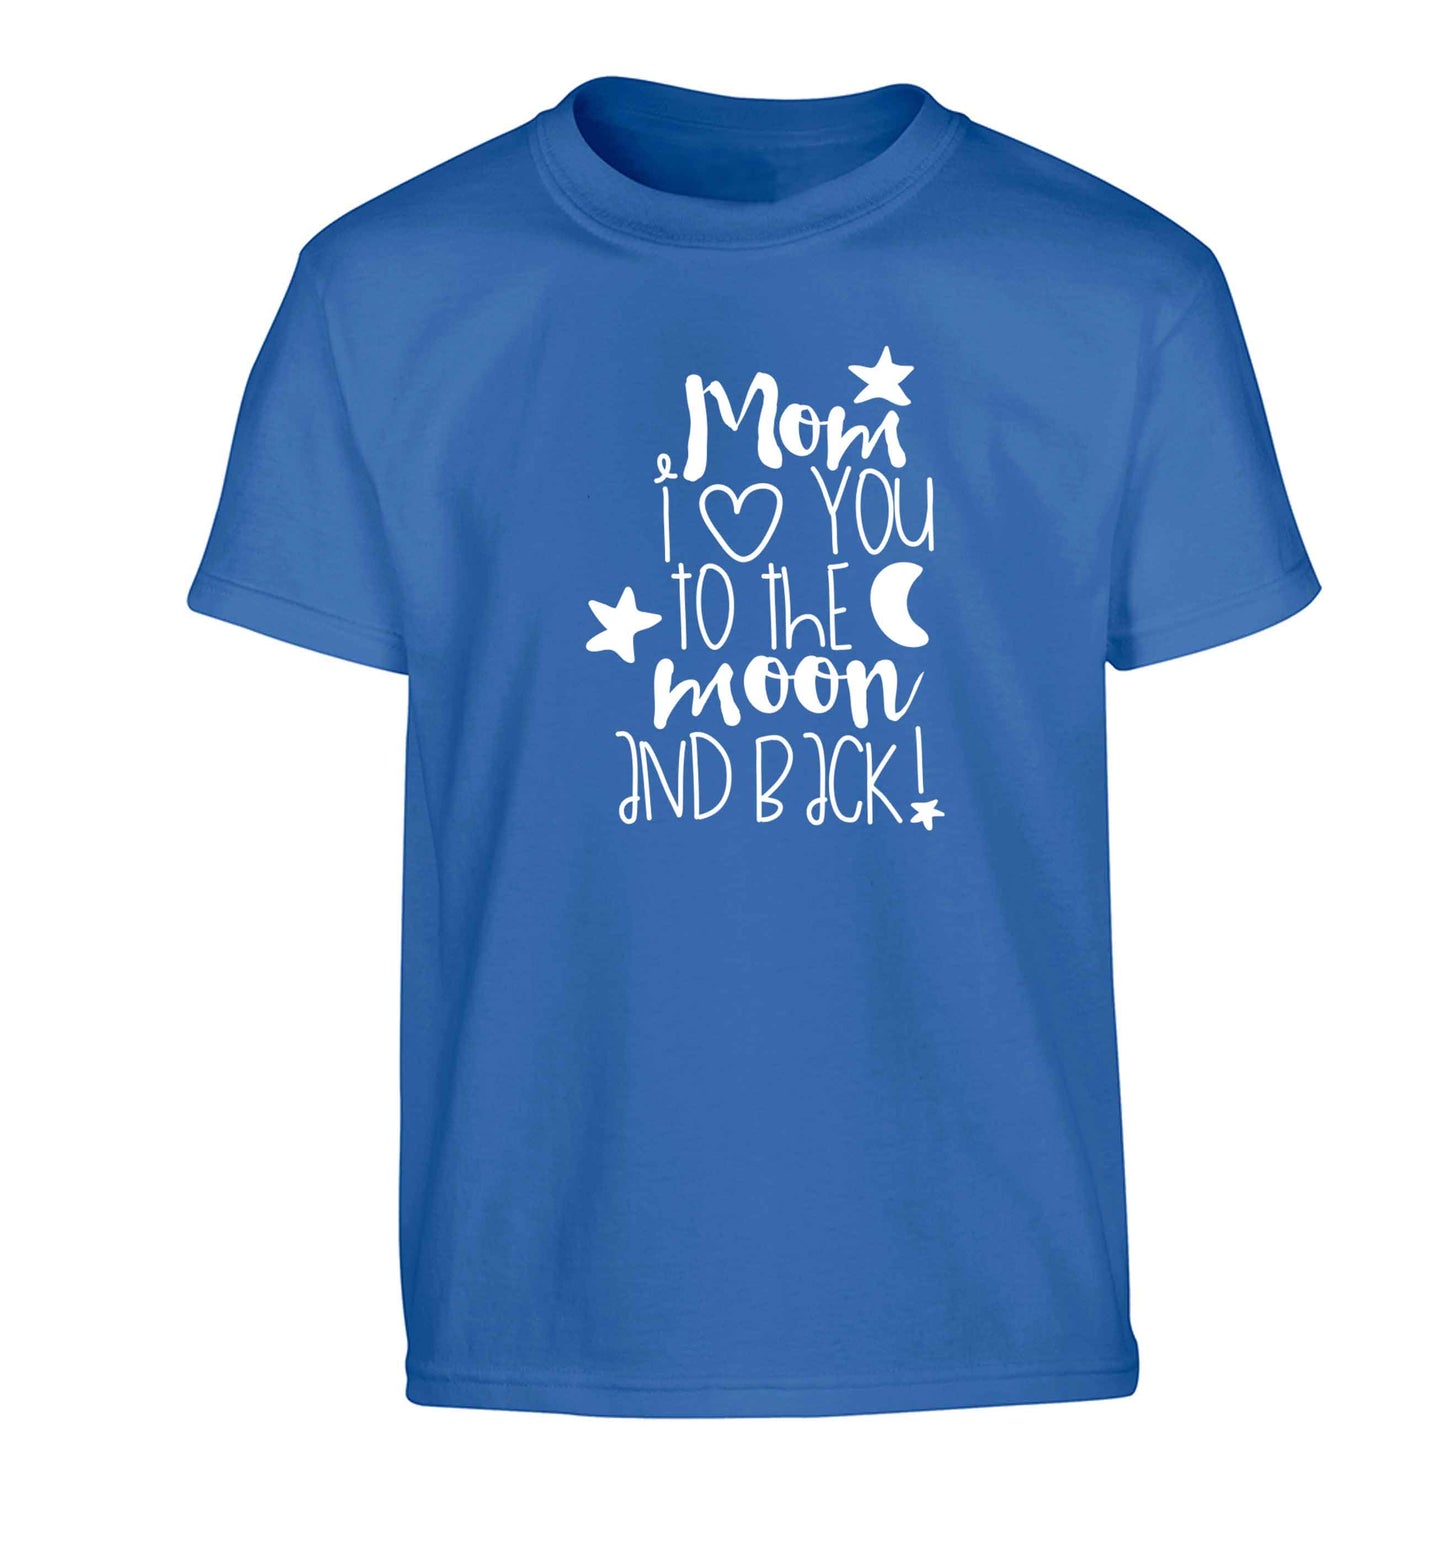 Mom I love you to the moon and back Children's blue Tshirt 12-13 Years